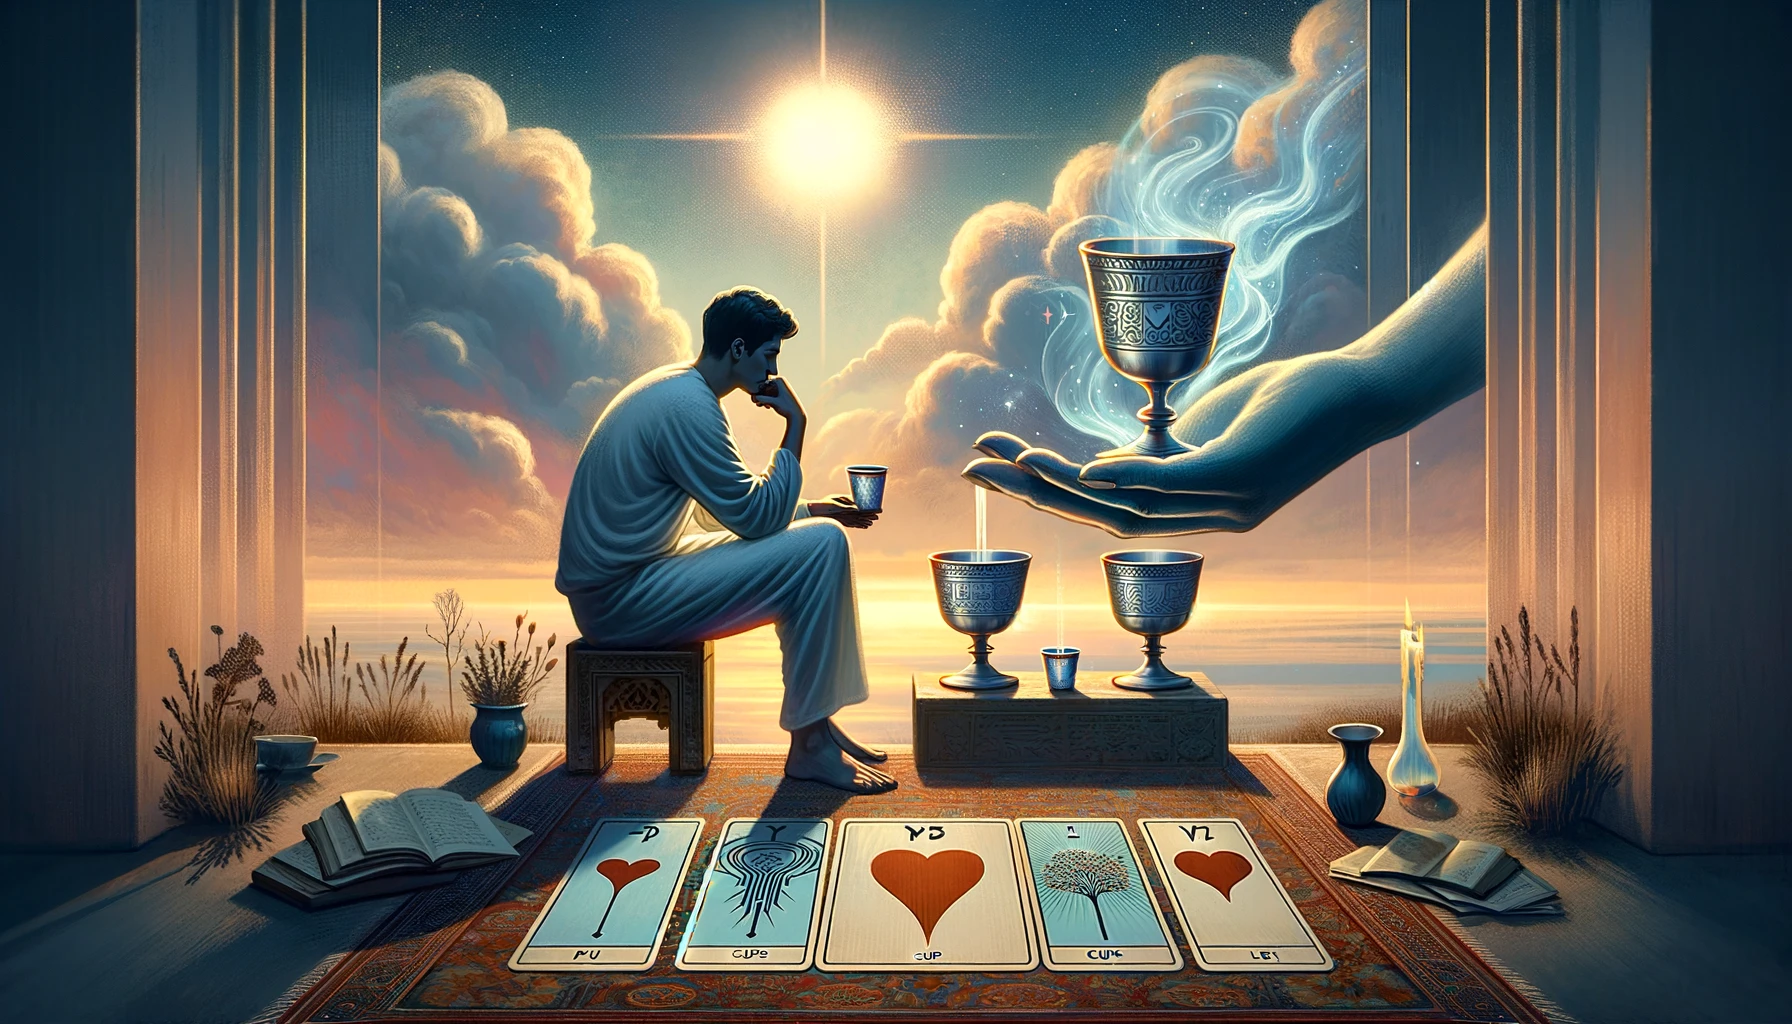 "Artwork showing a figure contemplating three cups before them, while a fourth cup is offered by a hand from a cloud, symbolizing missed opportunities and potential for new love. The scene conveys themes of introspection, emotional stagnation, and the possibility of awakening to new prospects with awareness and openness."